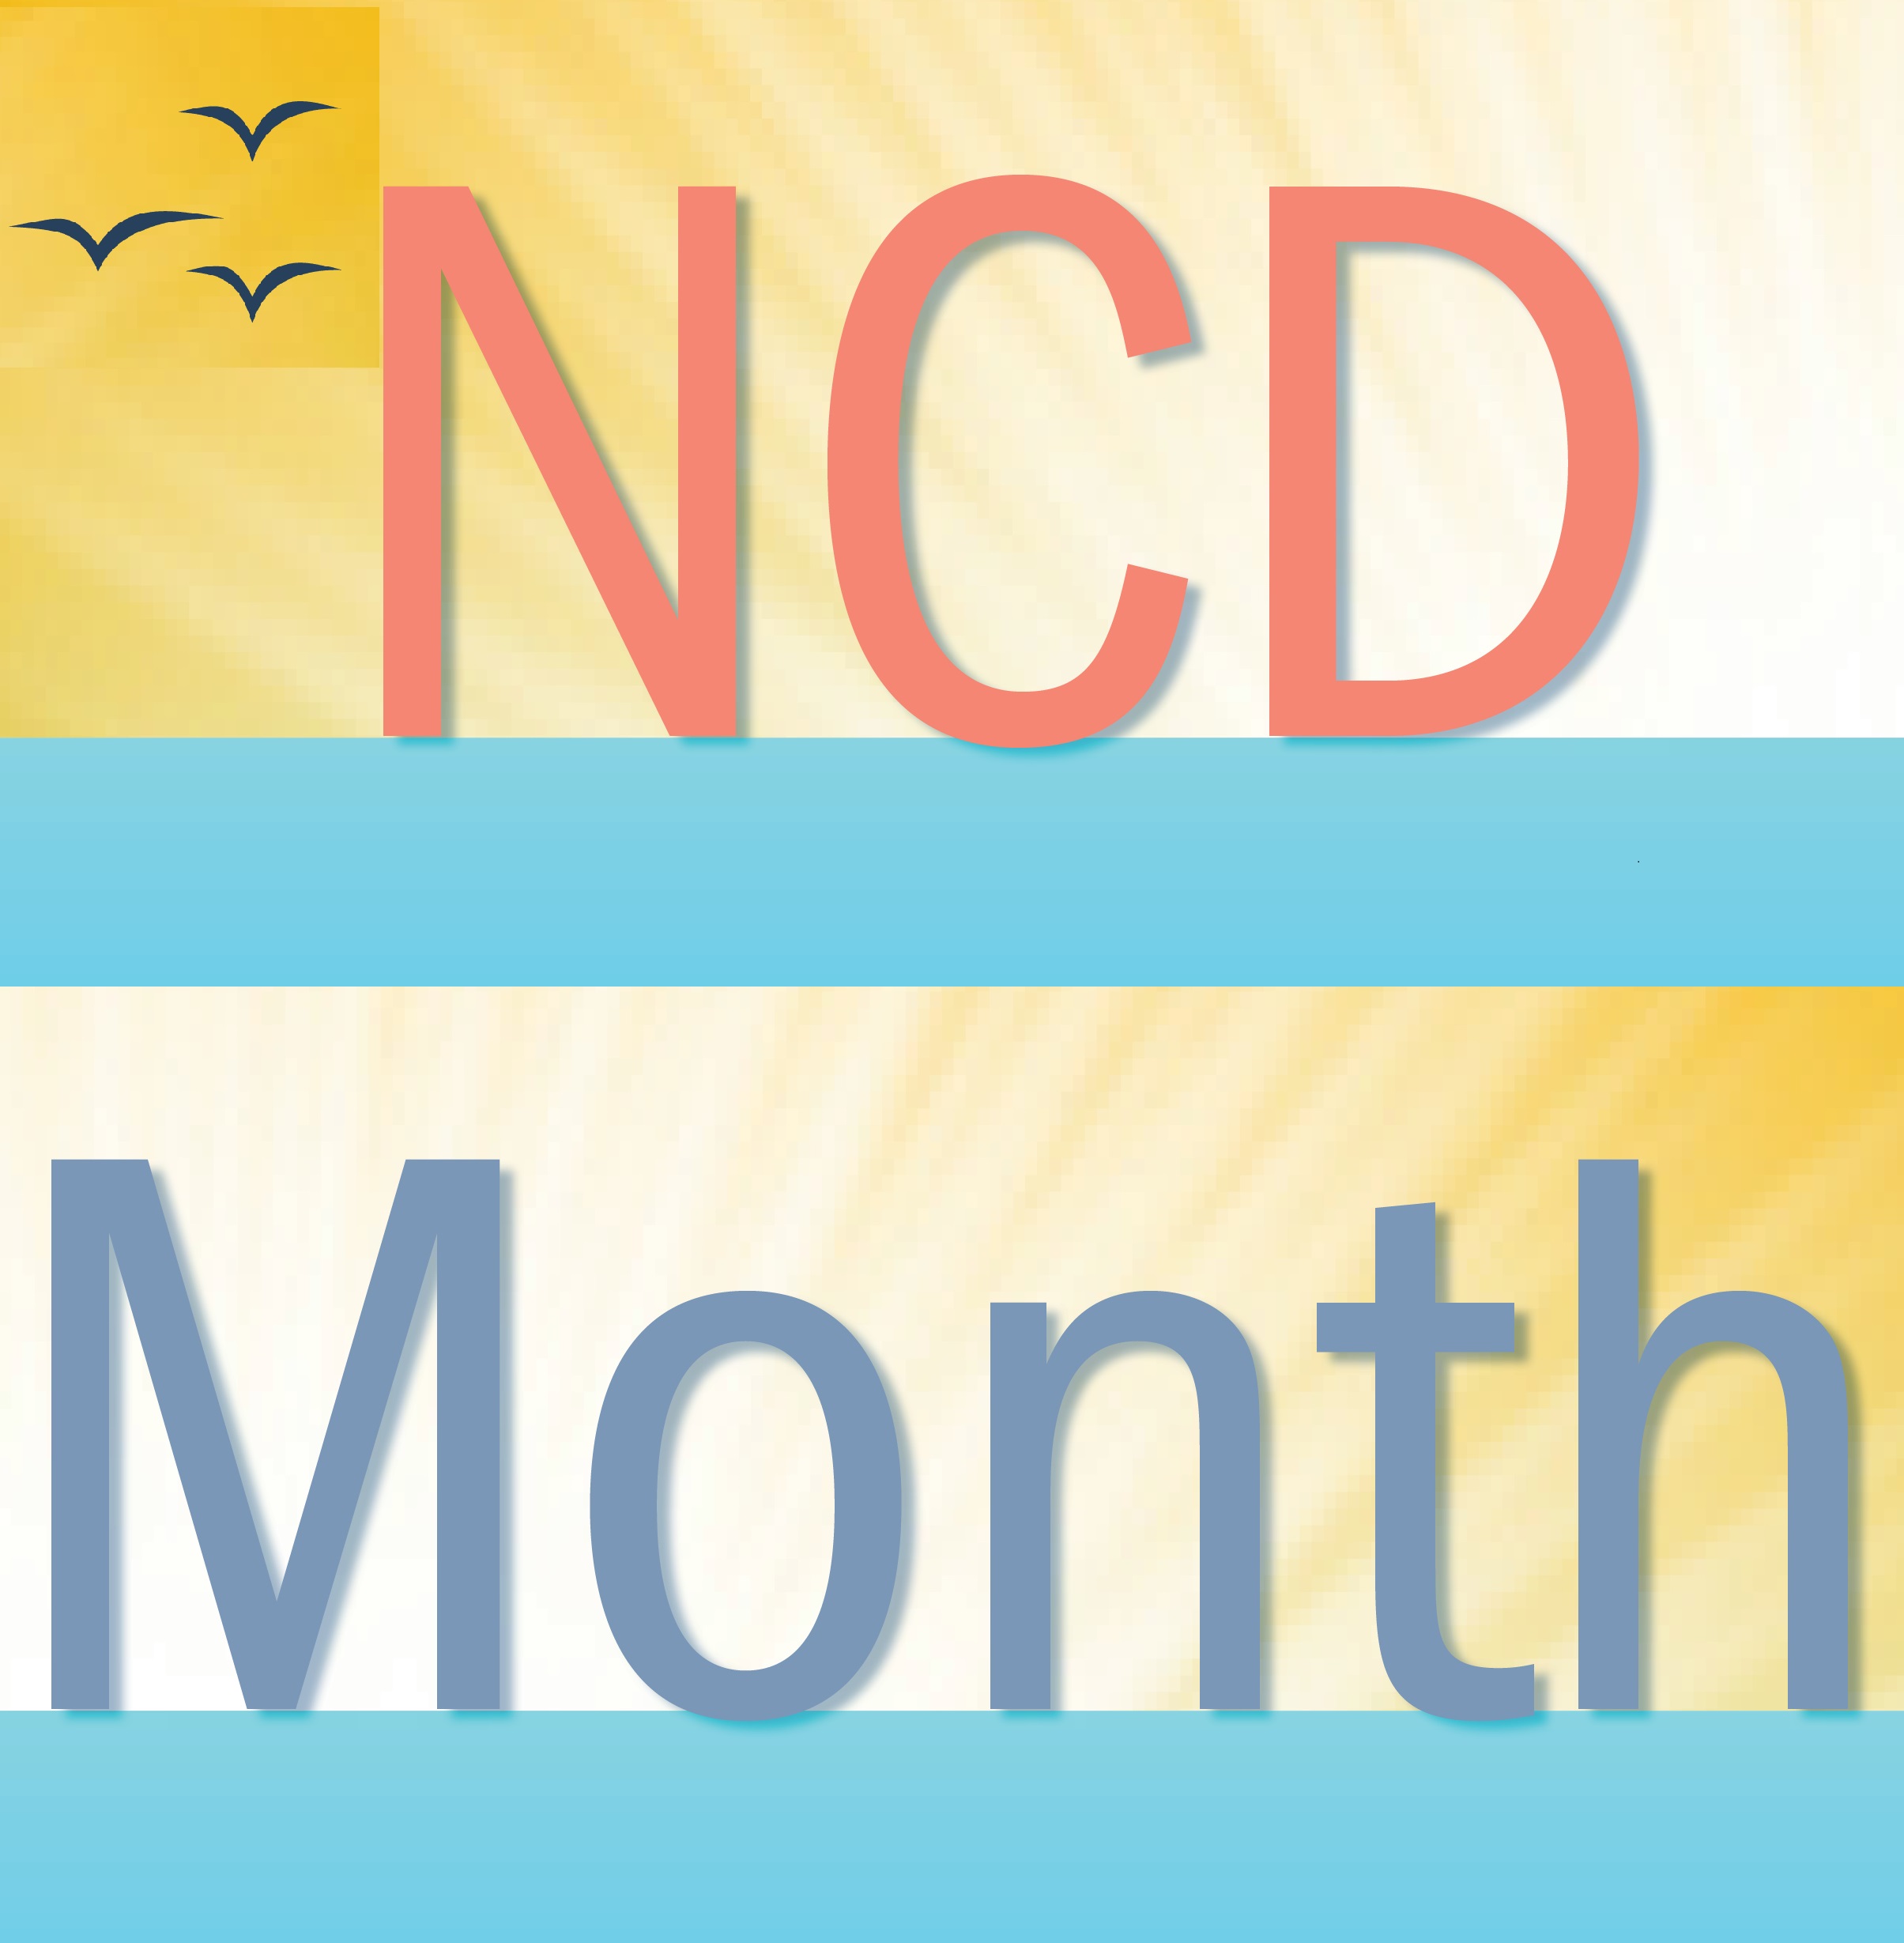 NCD Month is on a yellow, sunshine background with seagulls flying in the top of the image.